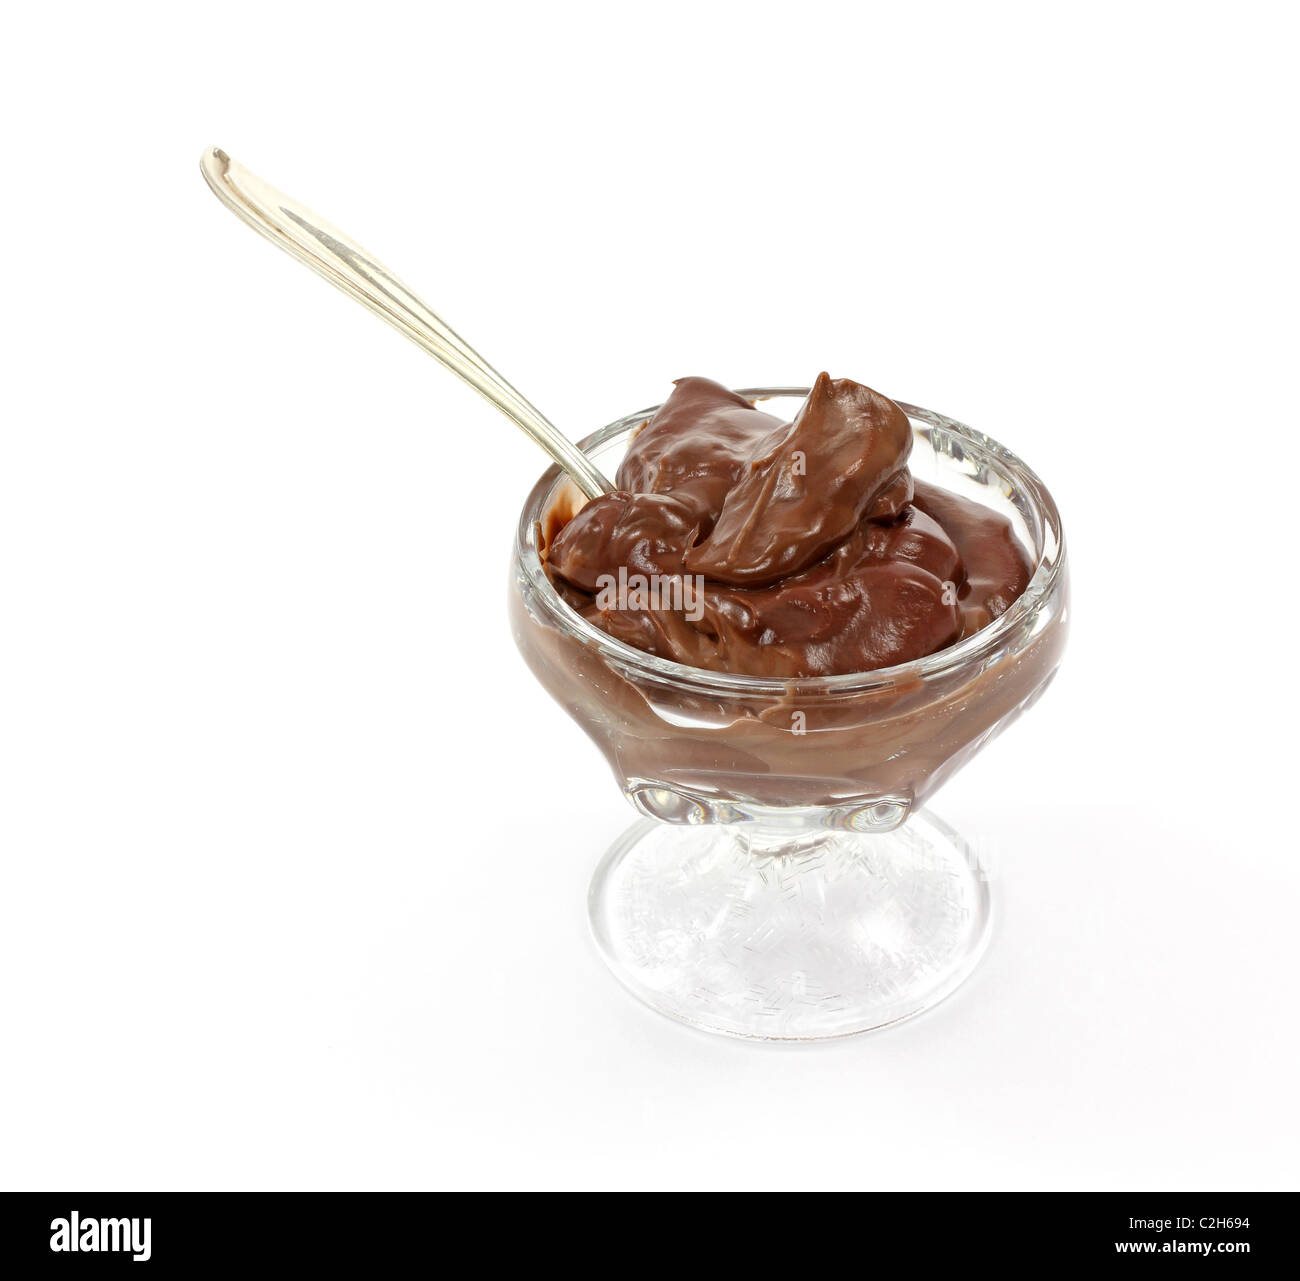 Chocolate pudding in dessert dish with spoon Stock Photo